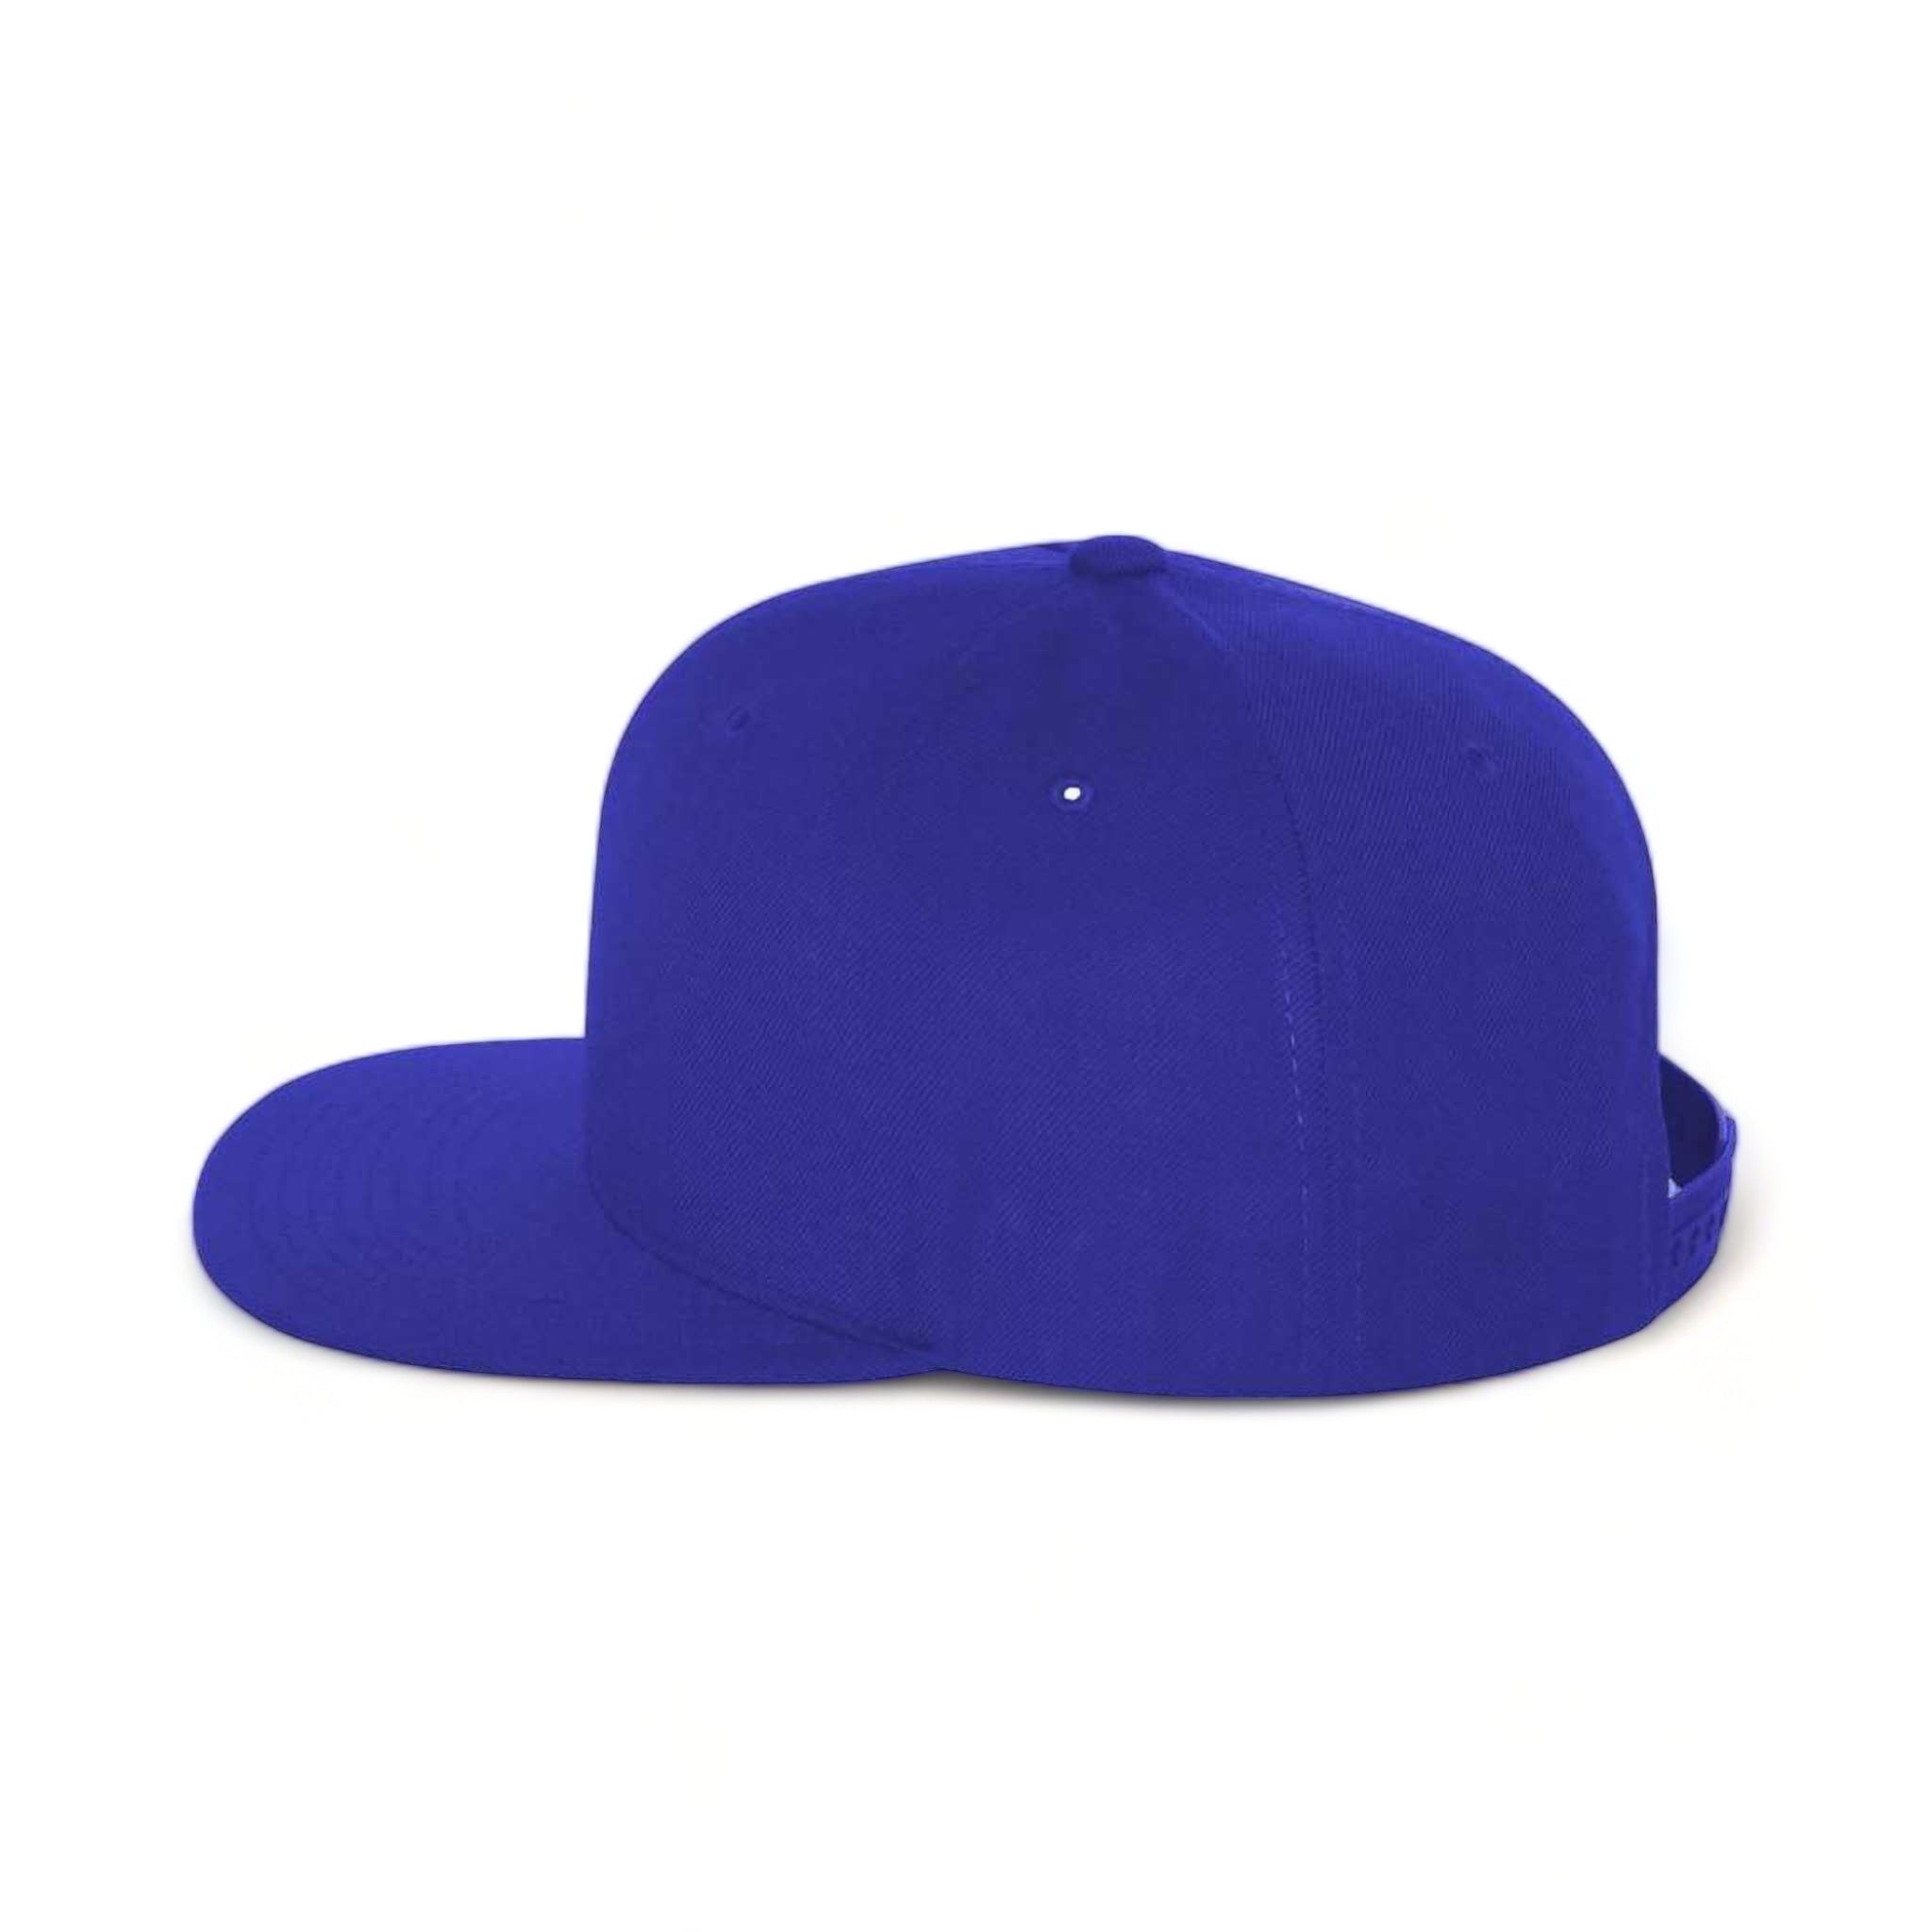 Side view of YP Classics 6089M custom hat in royal blue